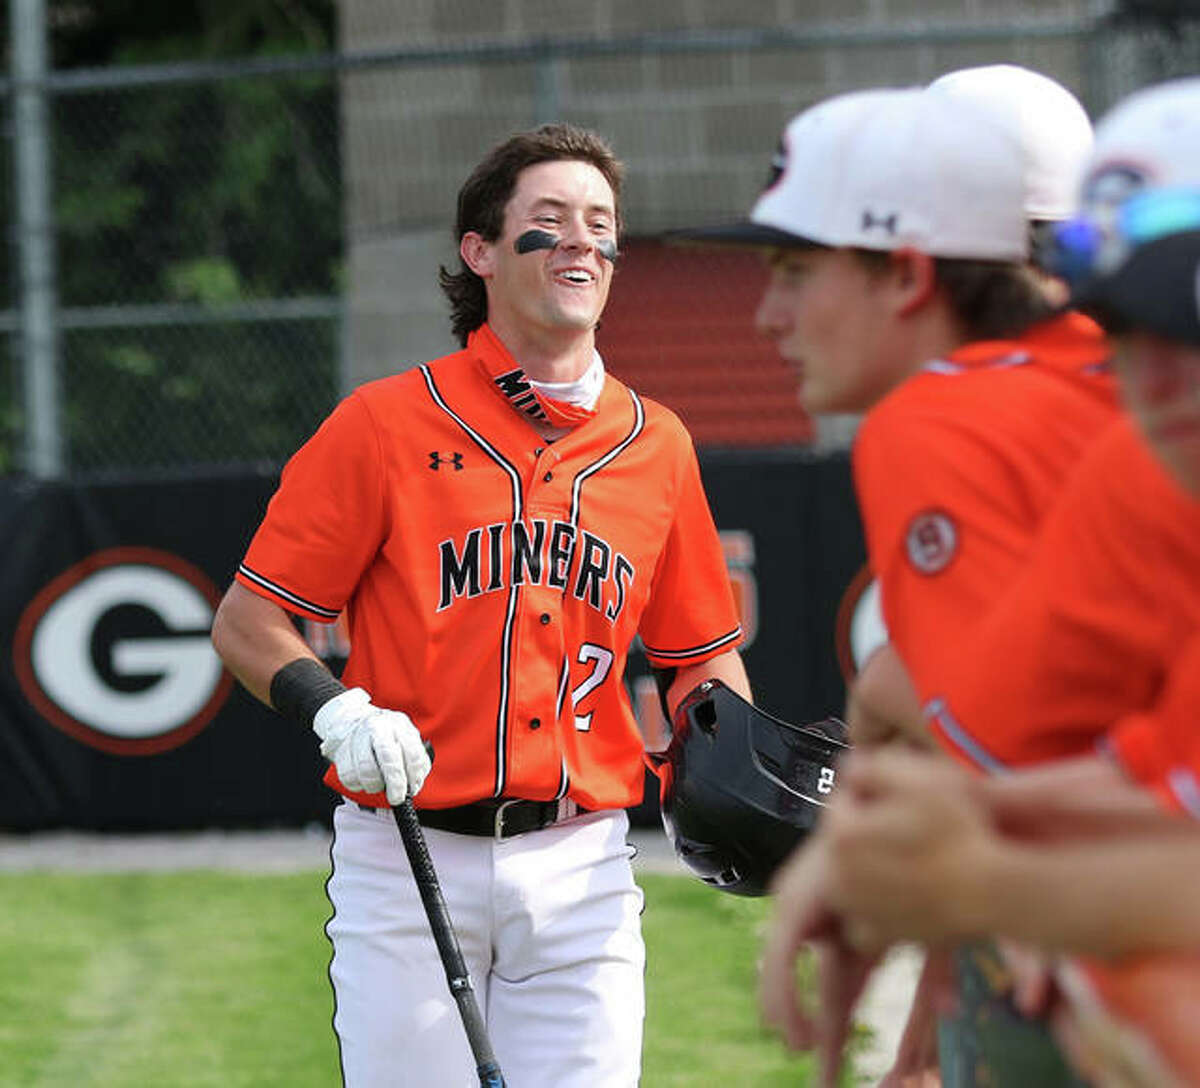 Cameron Hailstone (left), shown returning to his team’s dugout after hitting a home run for the Gillespie Miners this spring, had four hits and reached base six times Thursday to lead Alton Post 126 Legion baseball to a victory at Eureka, Missouri.